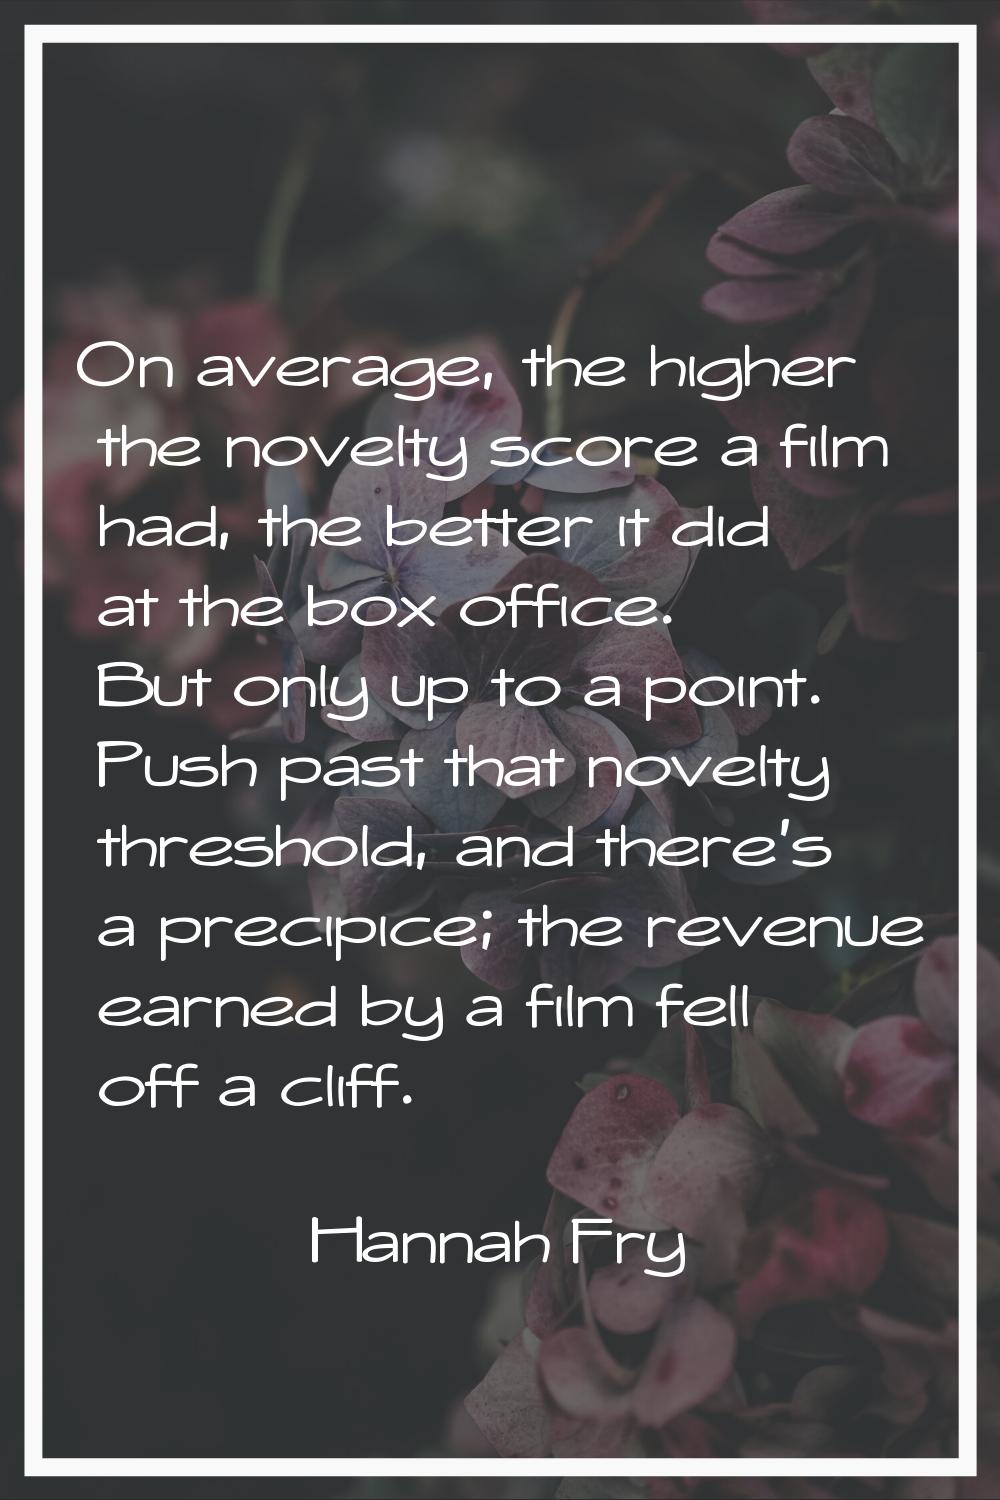 On average, the higher the novelty score a film had, the better it did at the box office. But only 